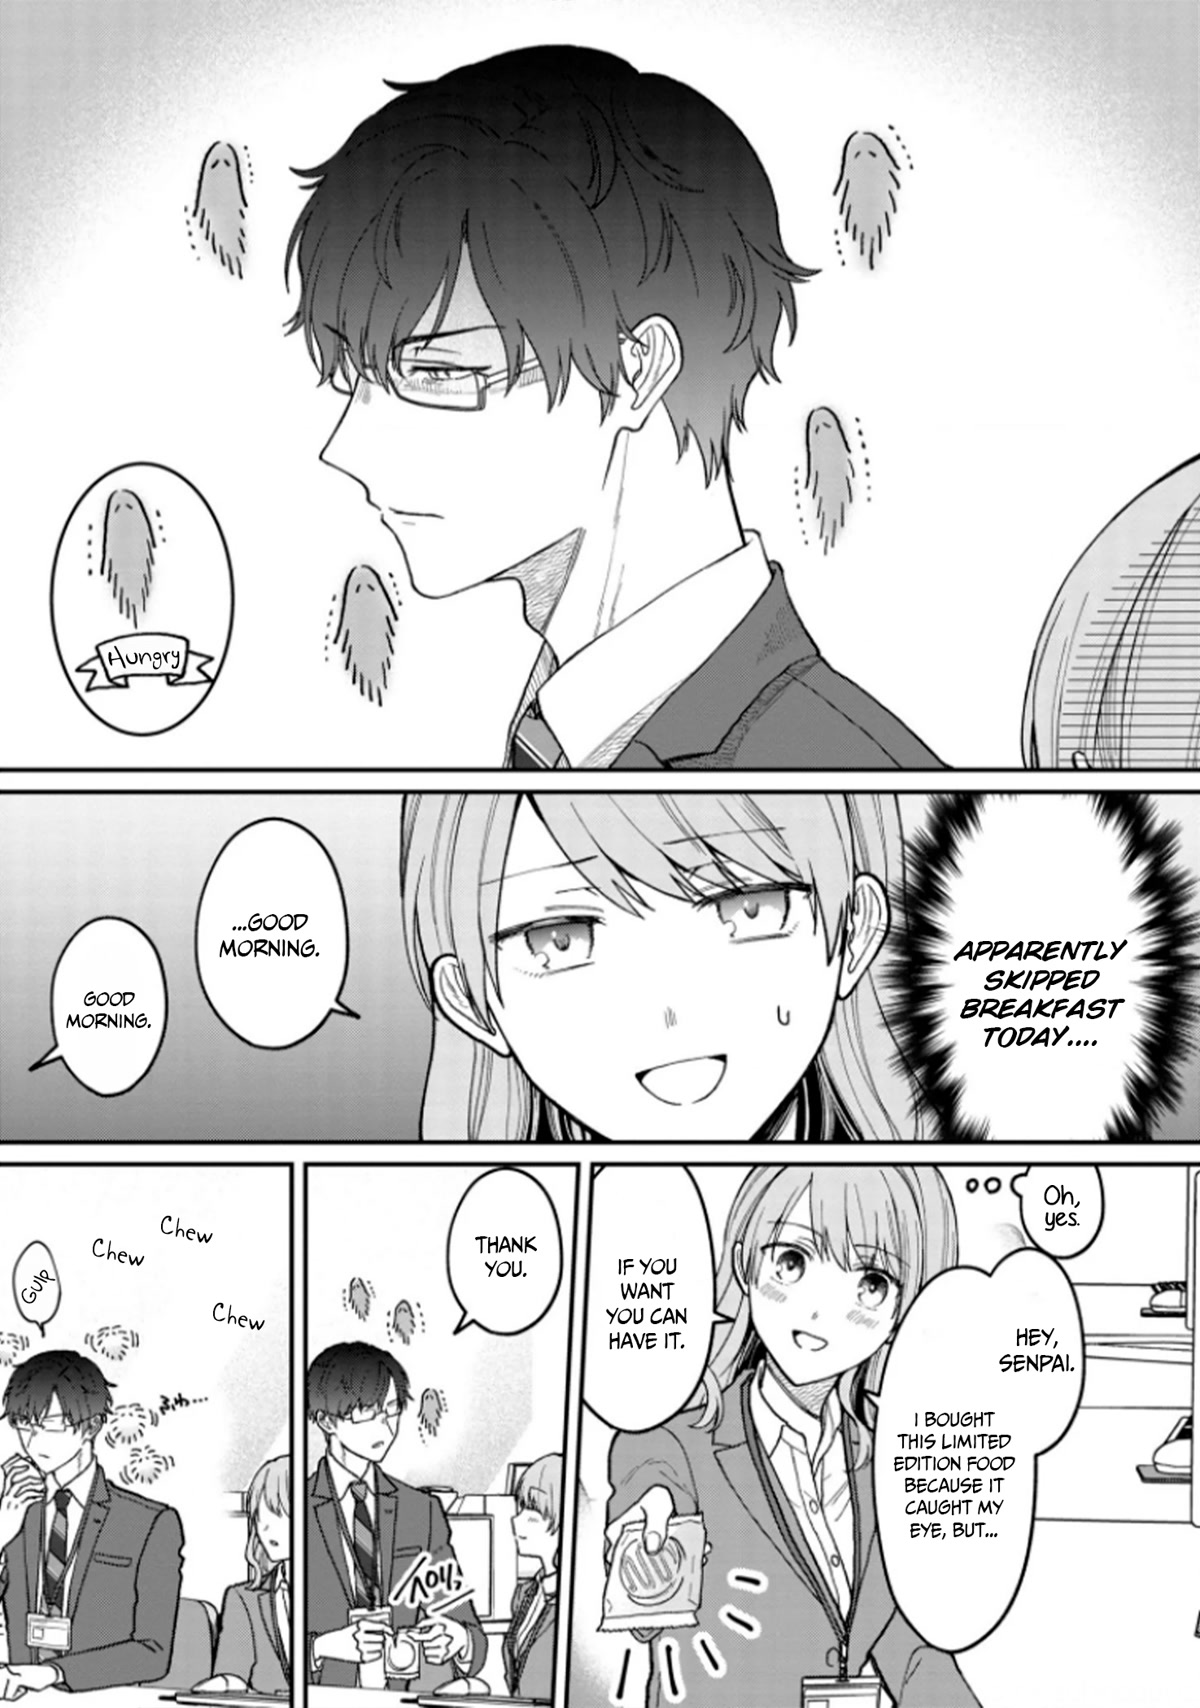 The New-Hire Who Could "Read" Emotions and the Unsociable Senpai - chapter 2 - #3